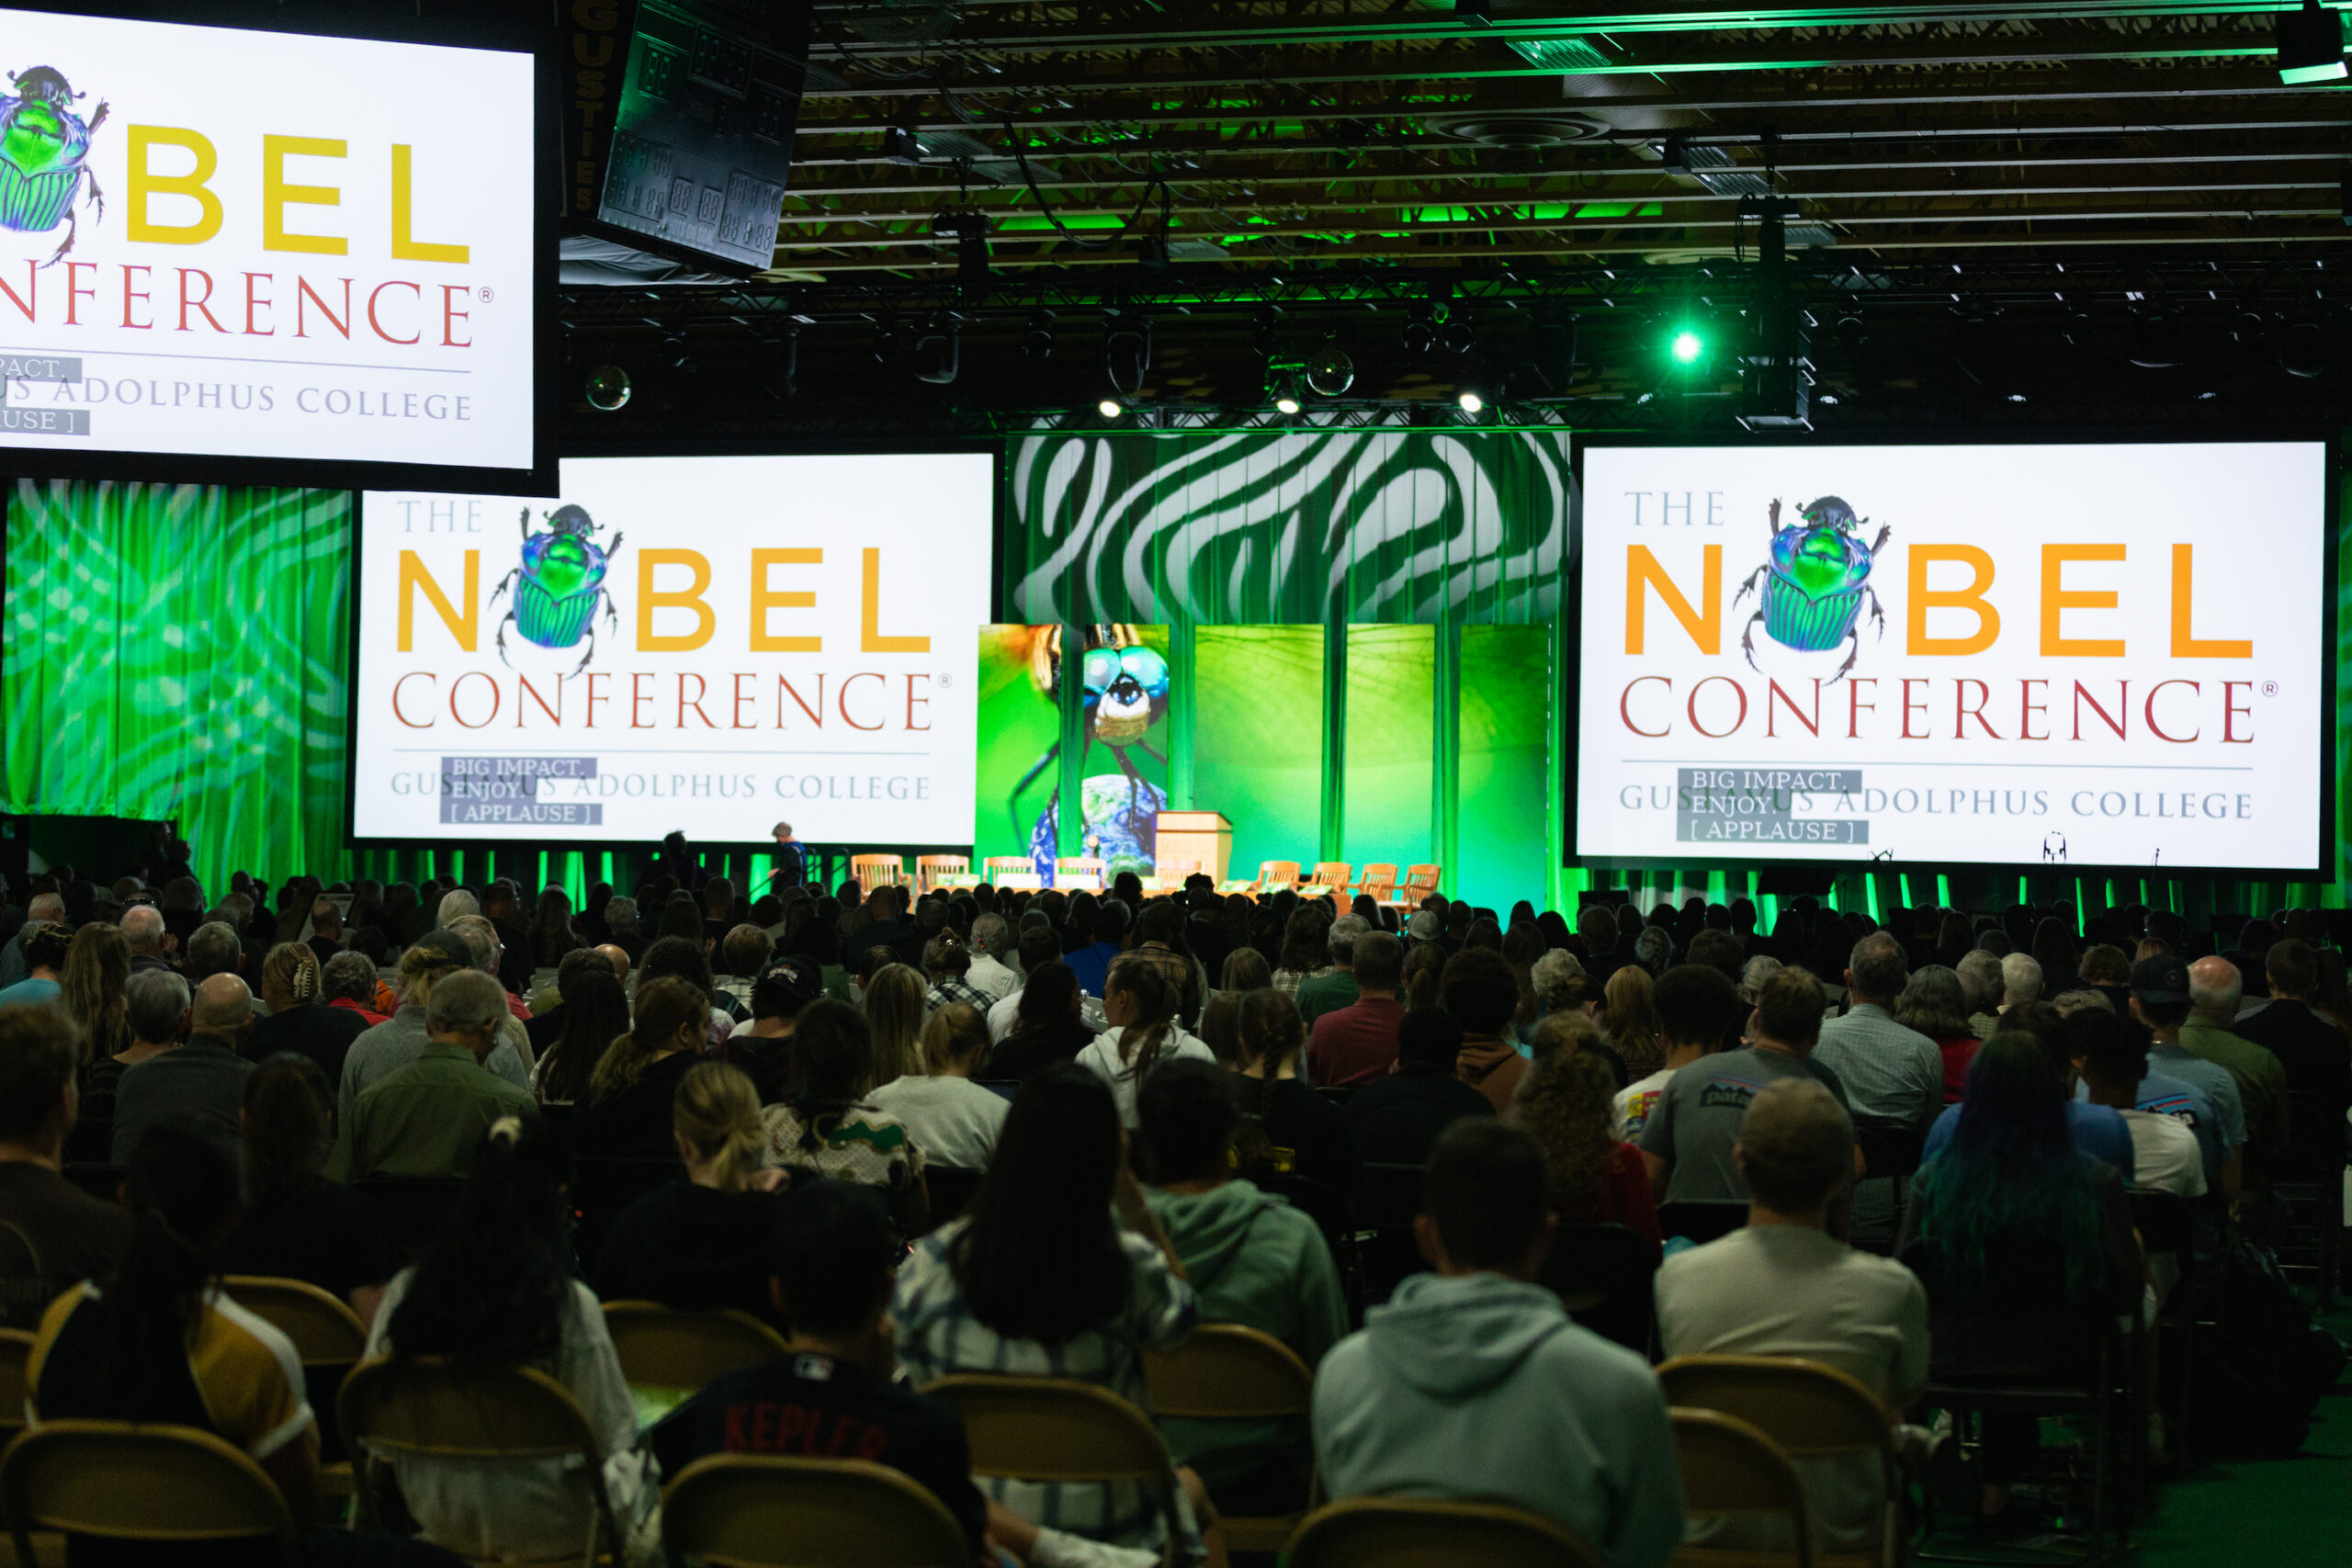 The Nobel Conference at Gustavus Adolphus College using Heroic Audiovisual